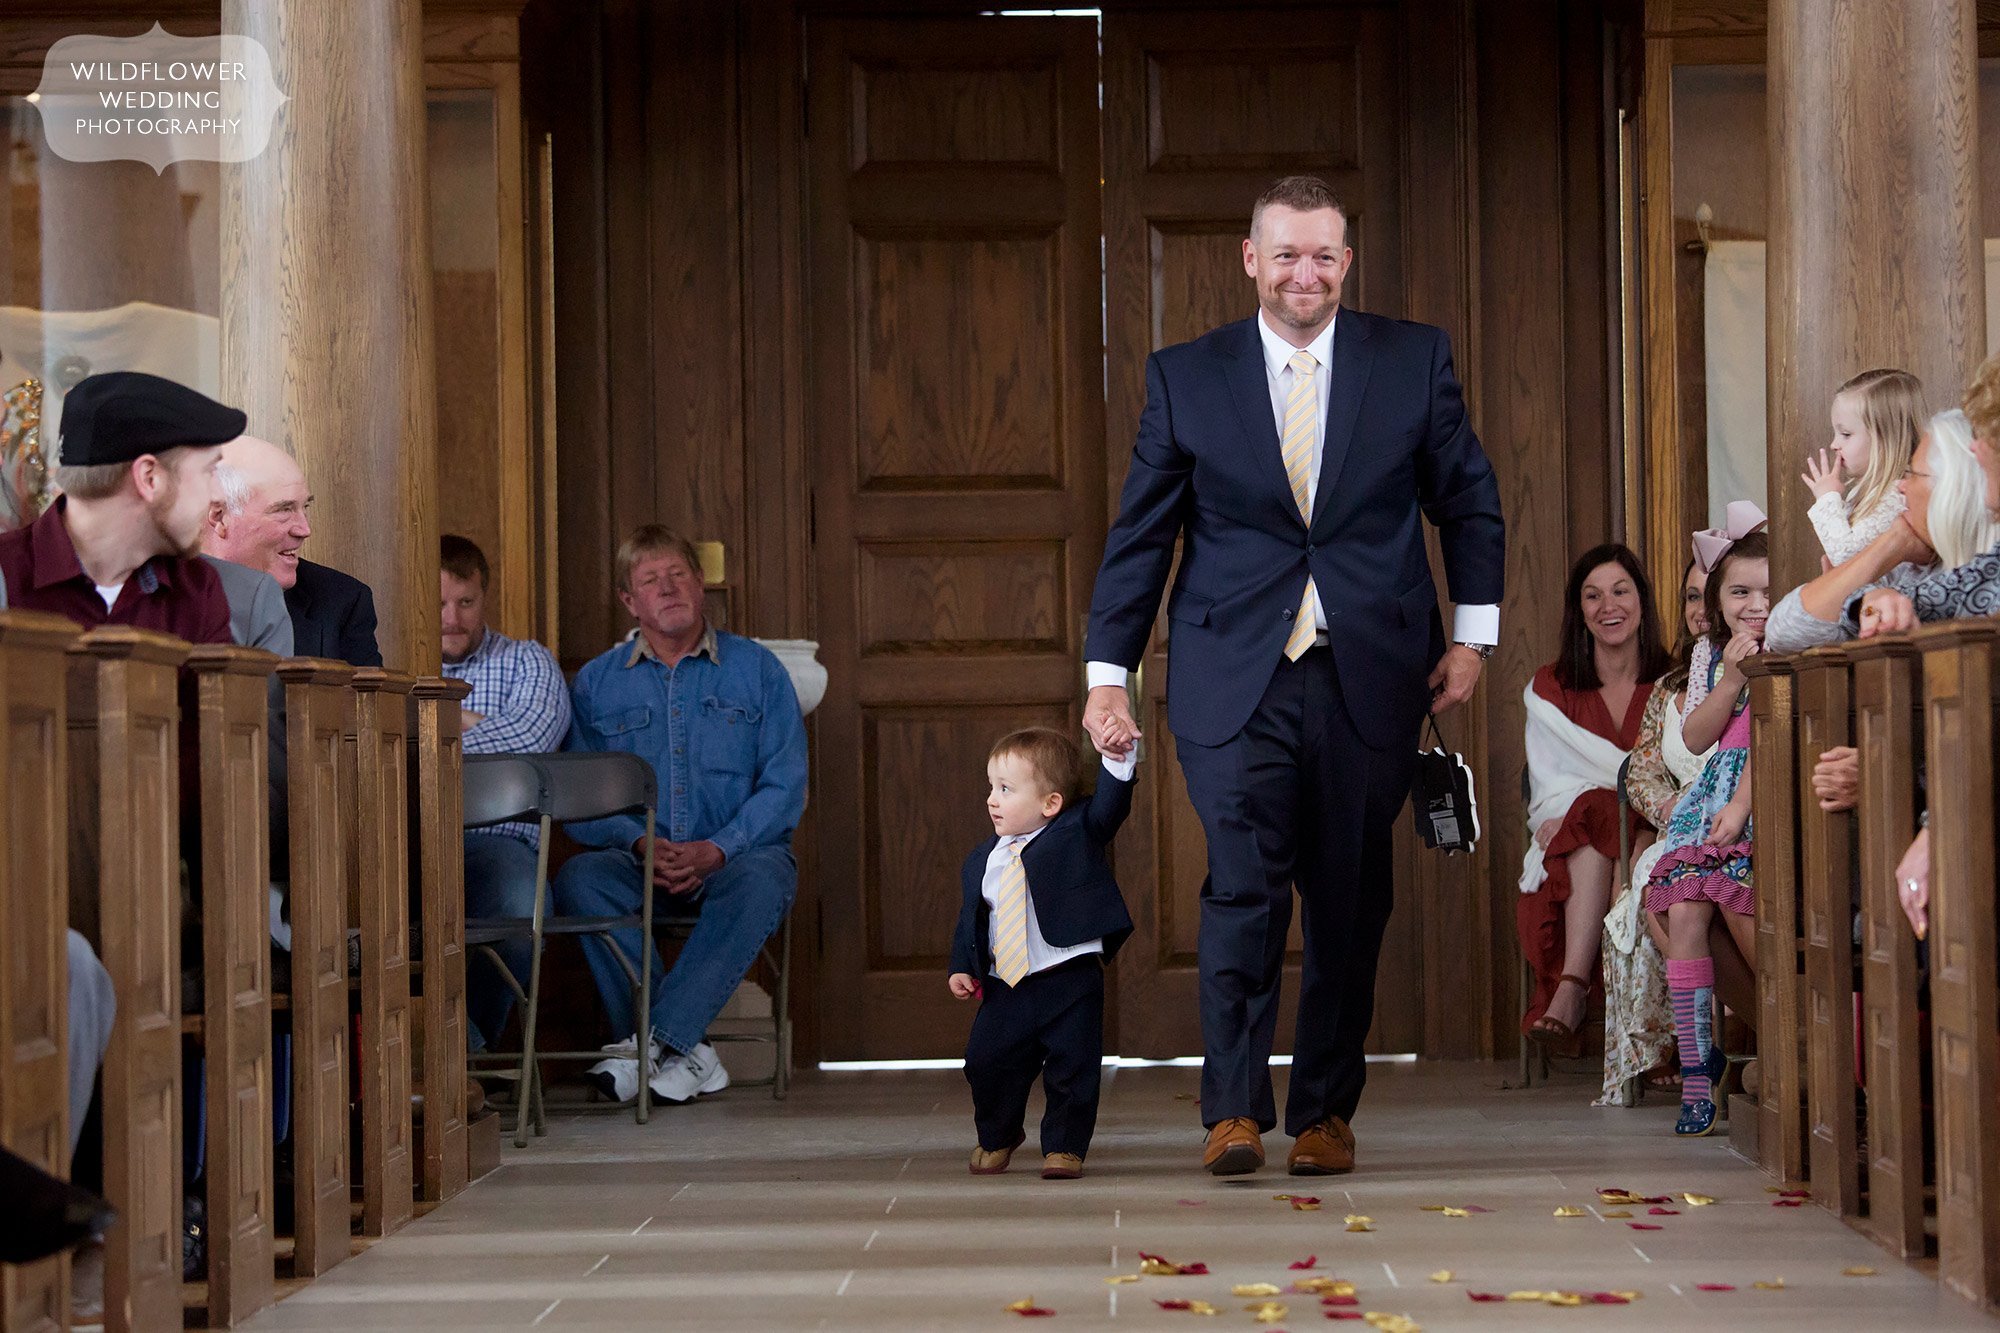 The ring bearer walks down the aisle at St. Mary's Church in Fulton, MO.